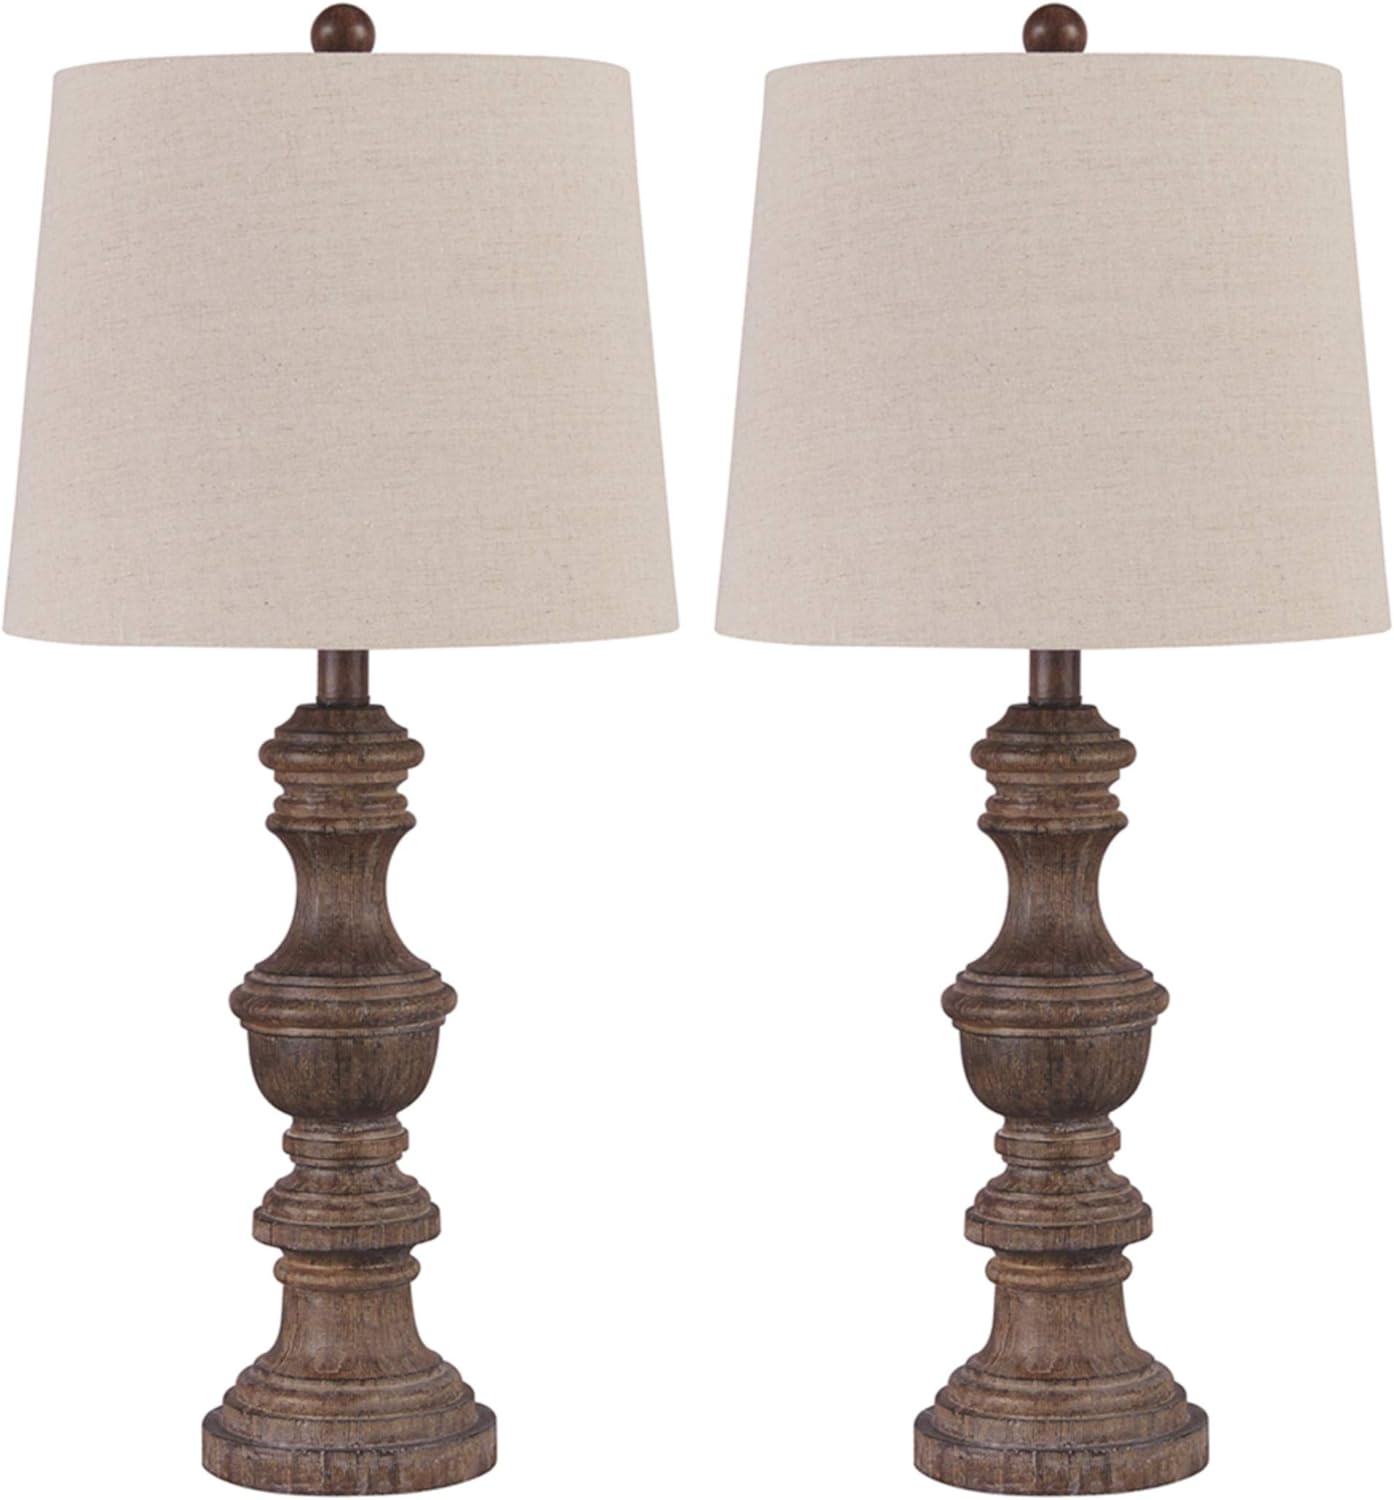 Signature Design by Ashley Magaly Cottage 27.65 Table Lamp, 2 Count Lamps, Brown